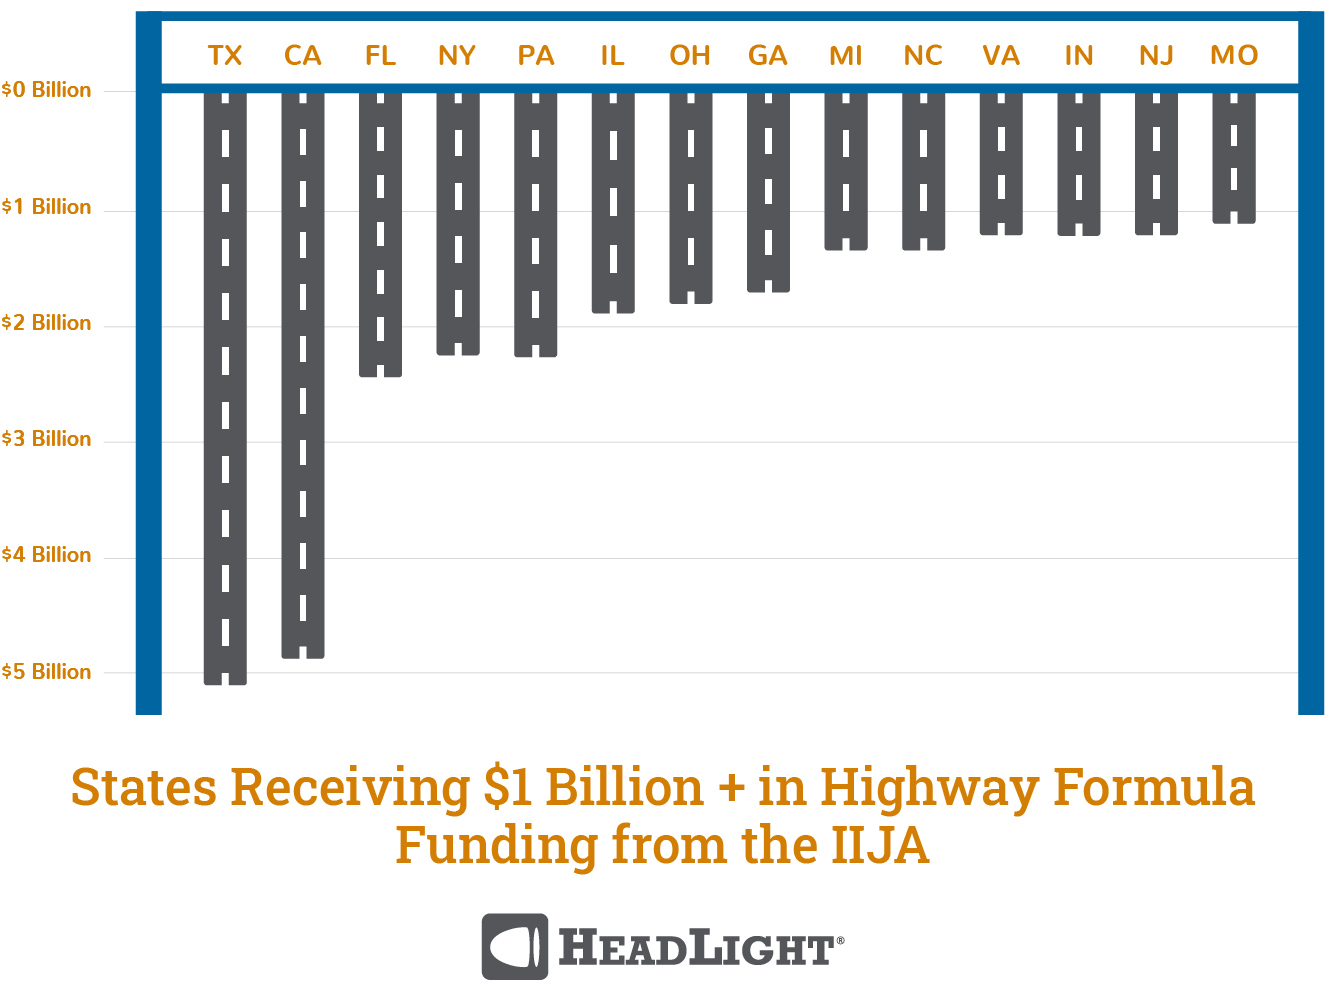 Chart of States Receiving Highway Infrastructure Funding